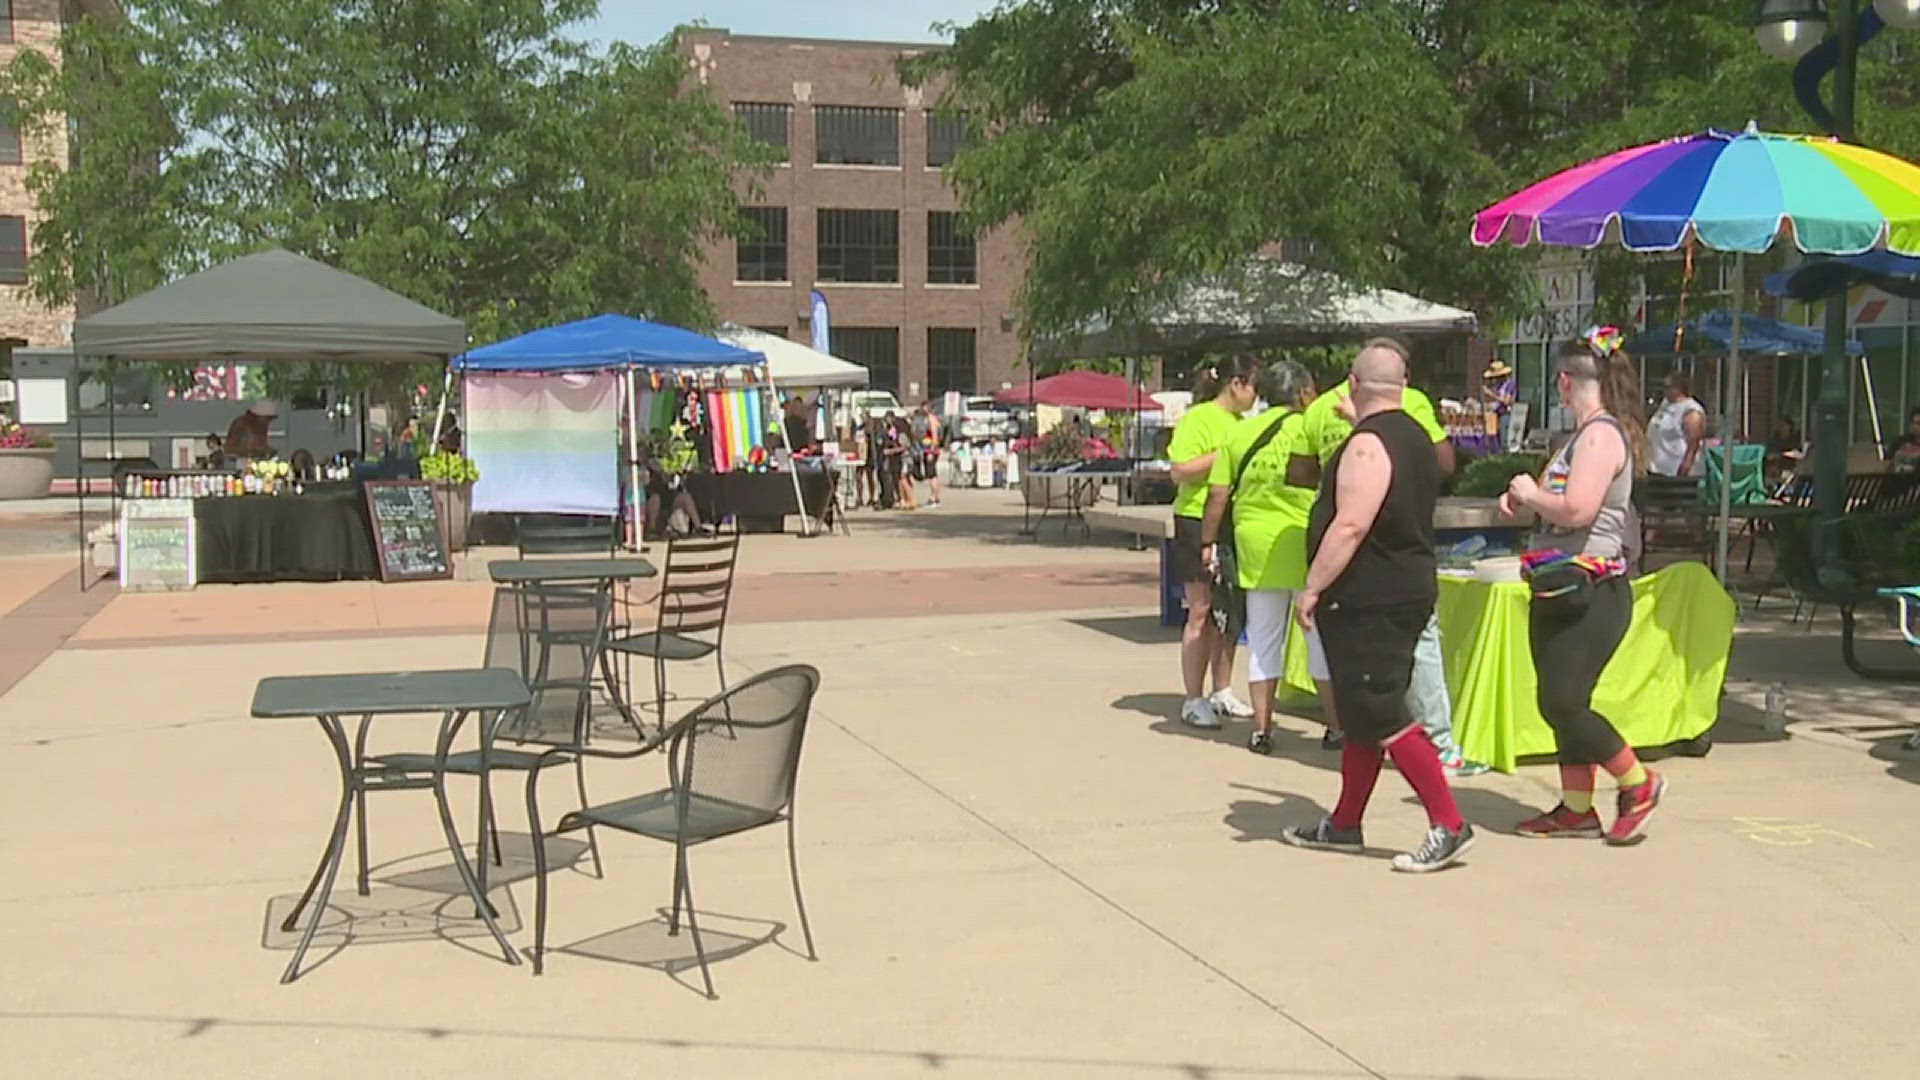 Organizers said the event celebrates the Quad Cities' LGBTQ+ community and raises awareness of available resources.